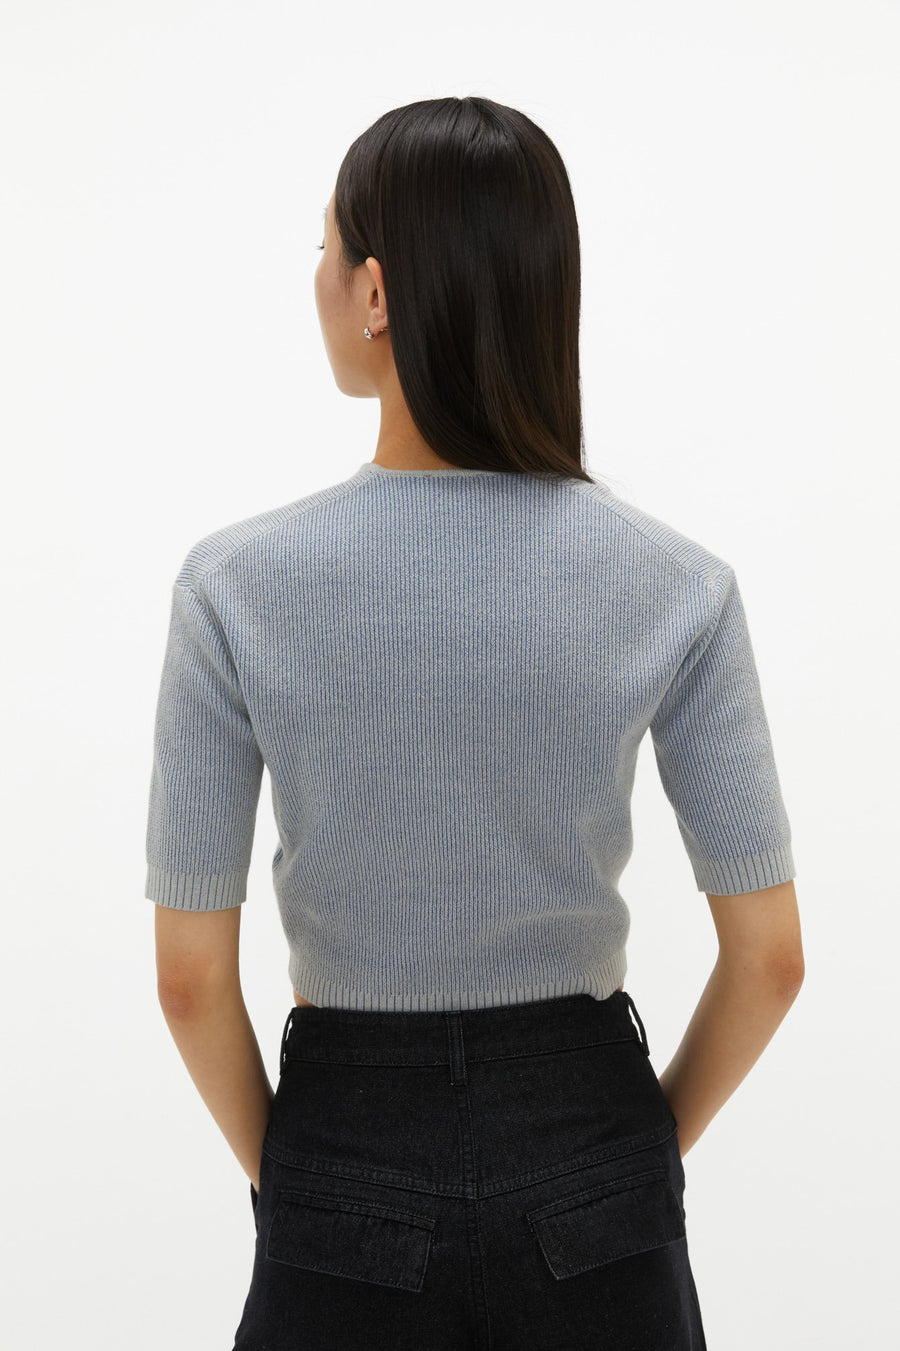 by DOE - Square-neck Mixed Knit Top